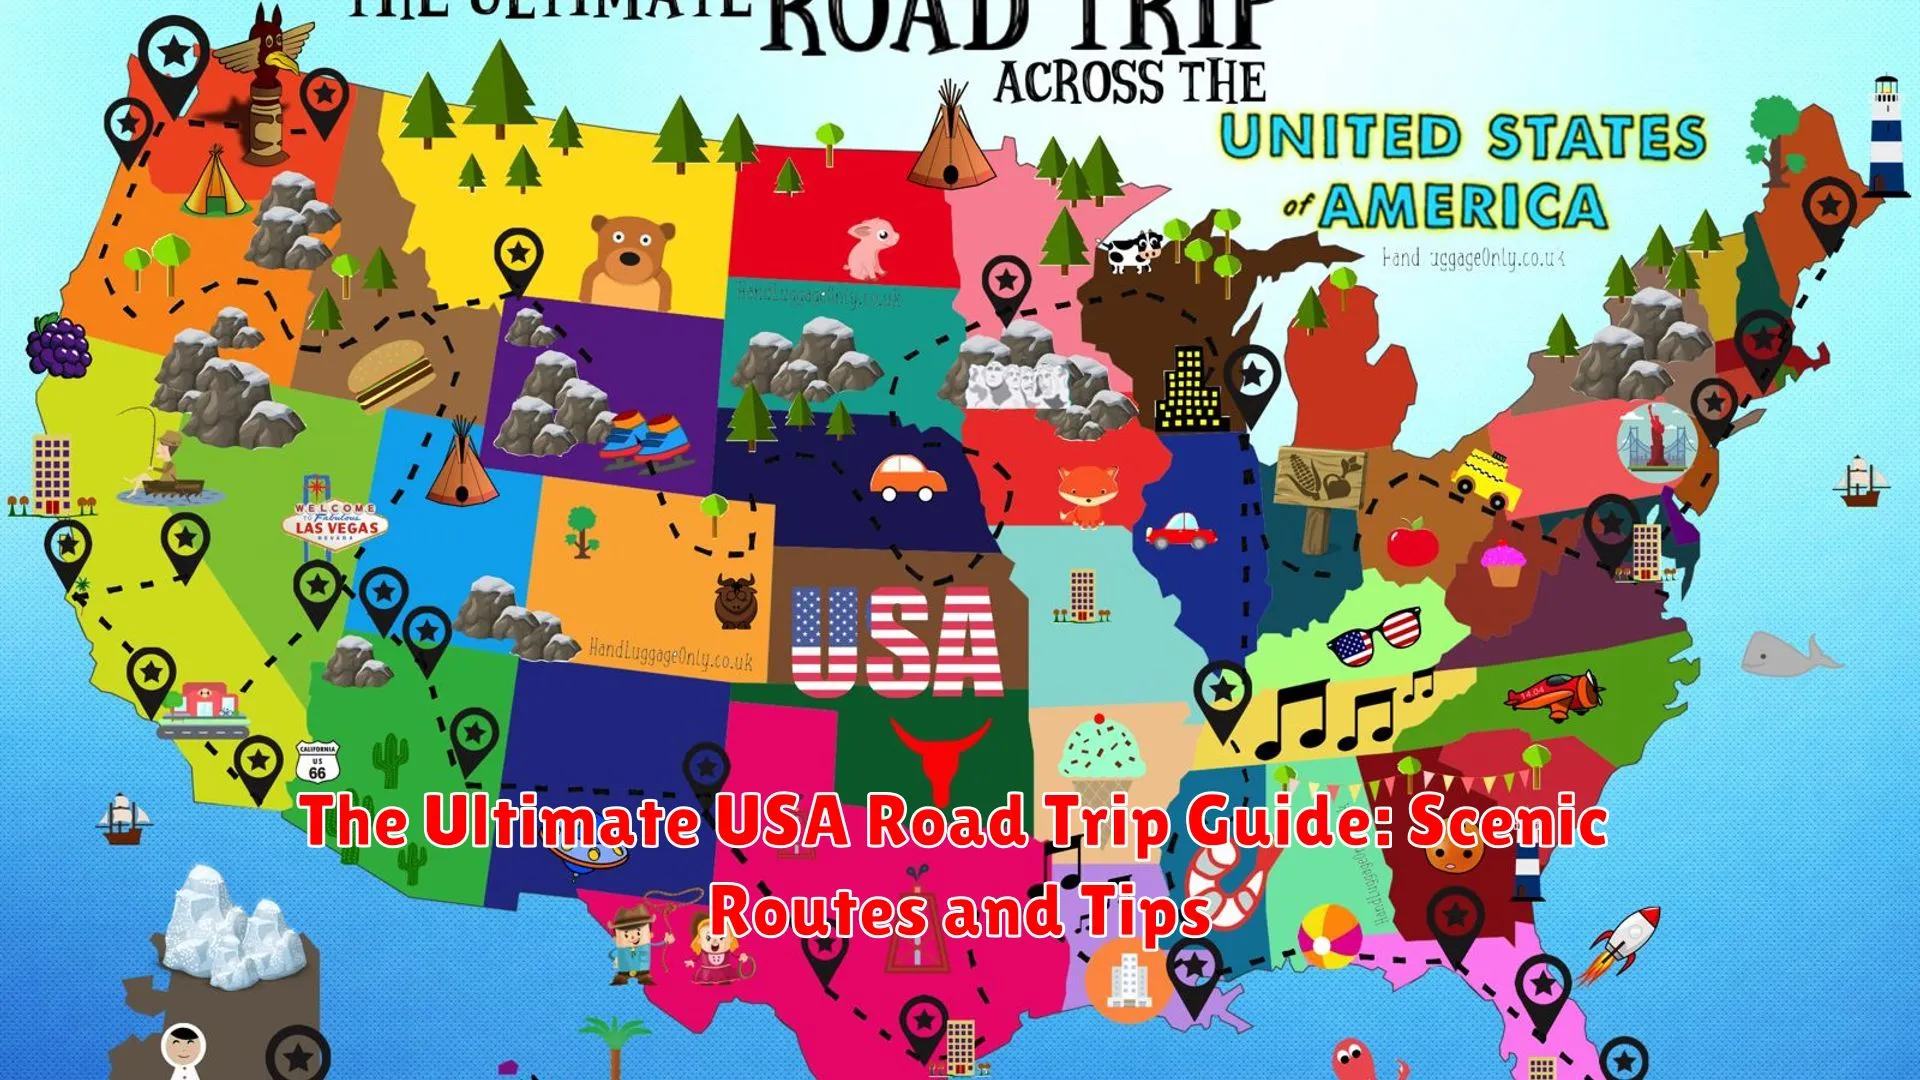 The Ultimate USA Road Trip Guide: Scenic Routes and Tips